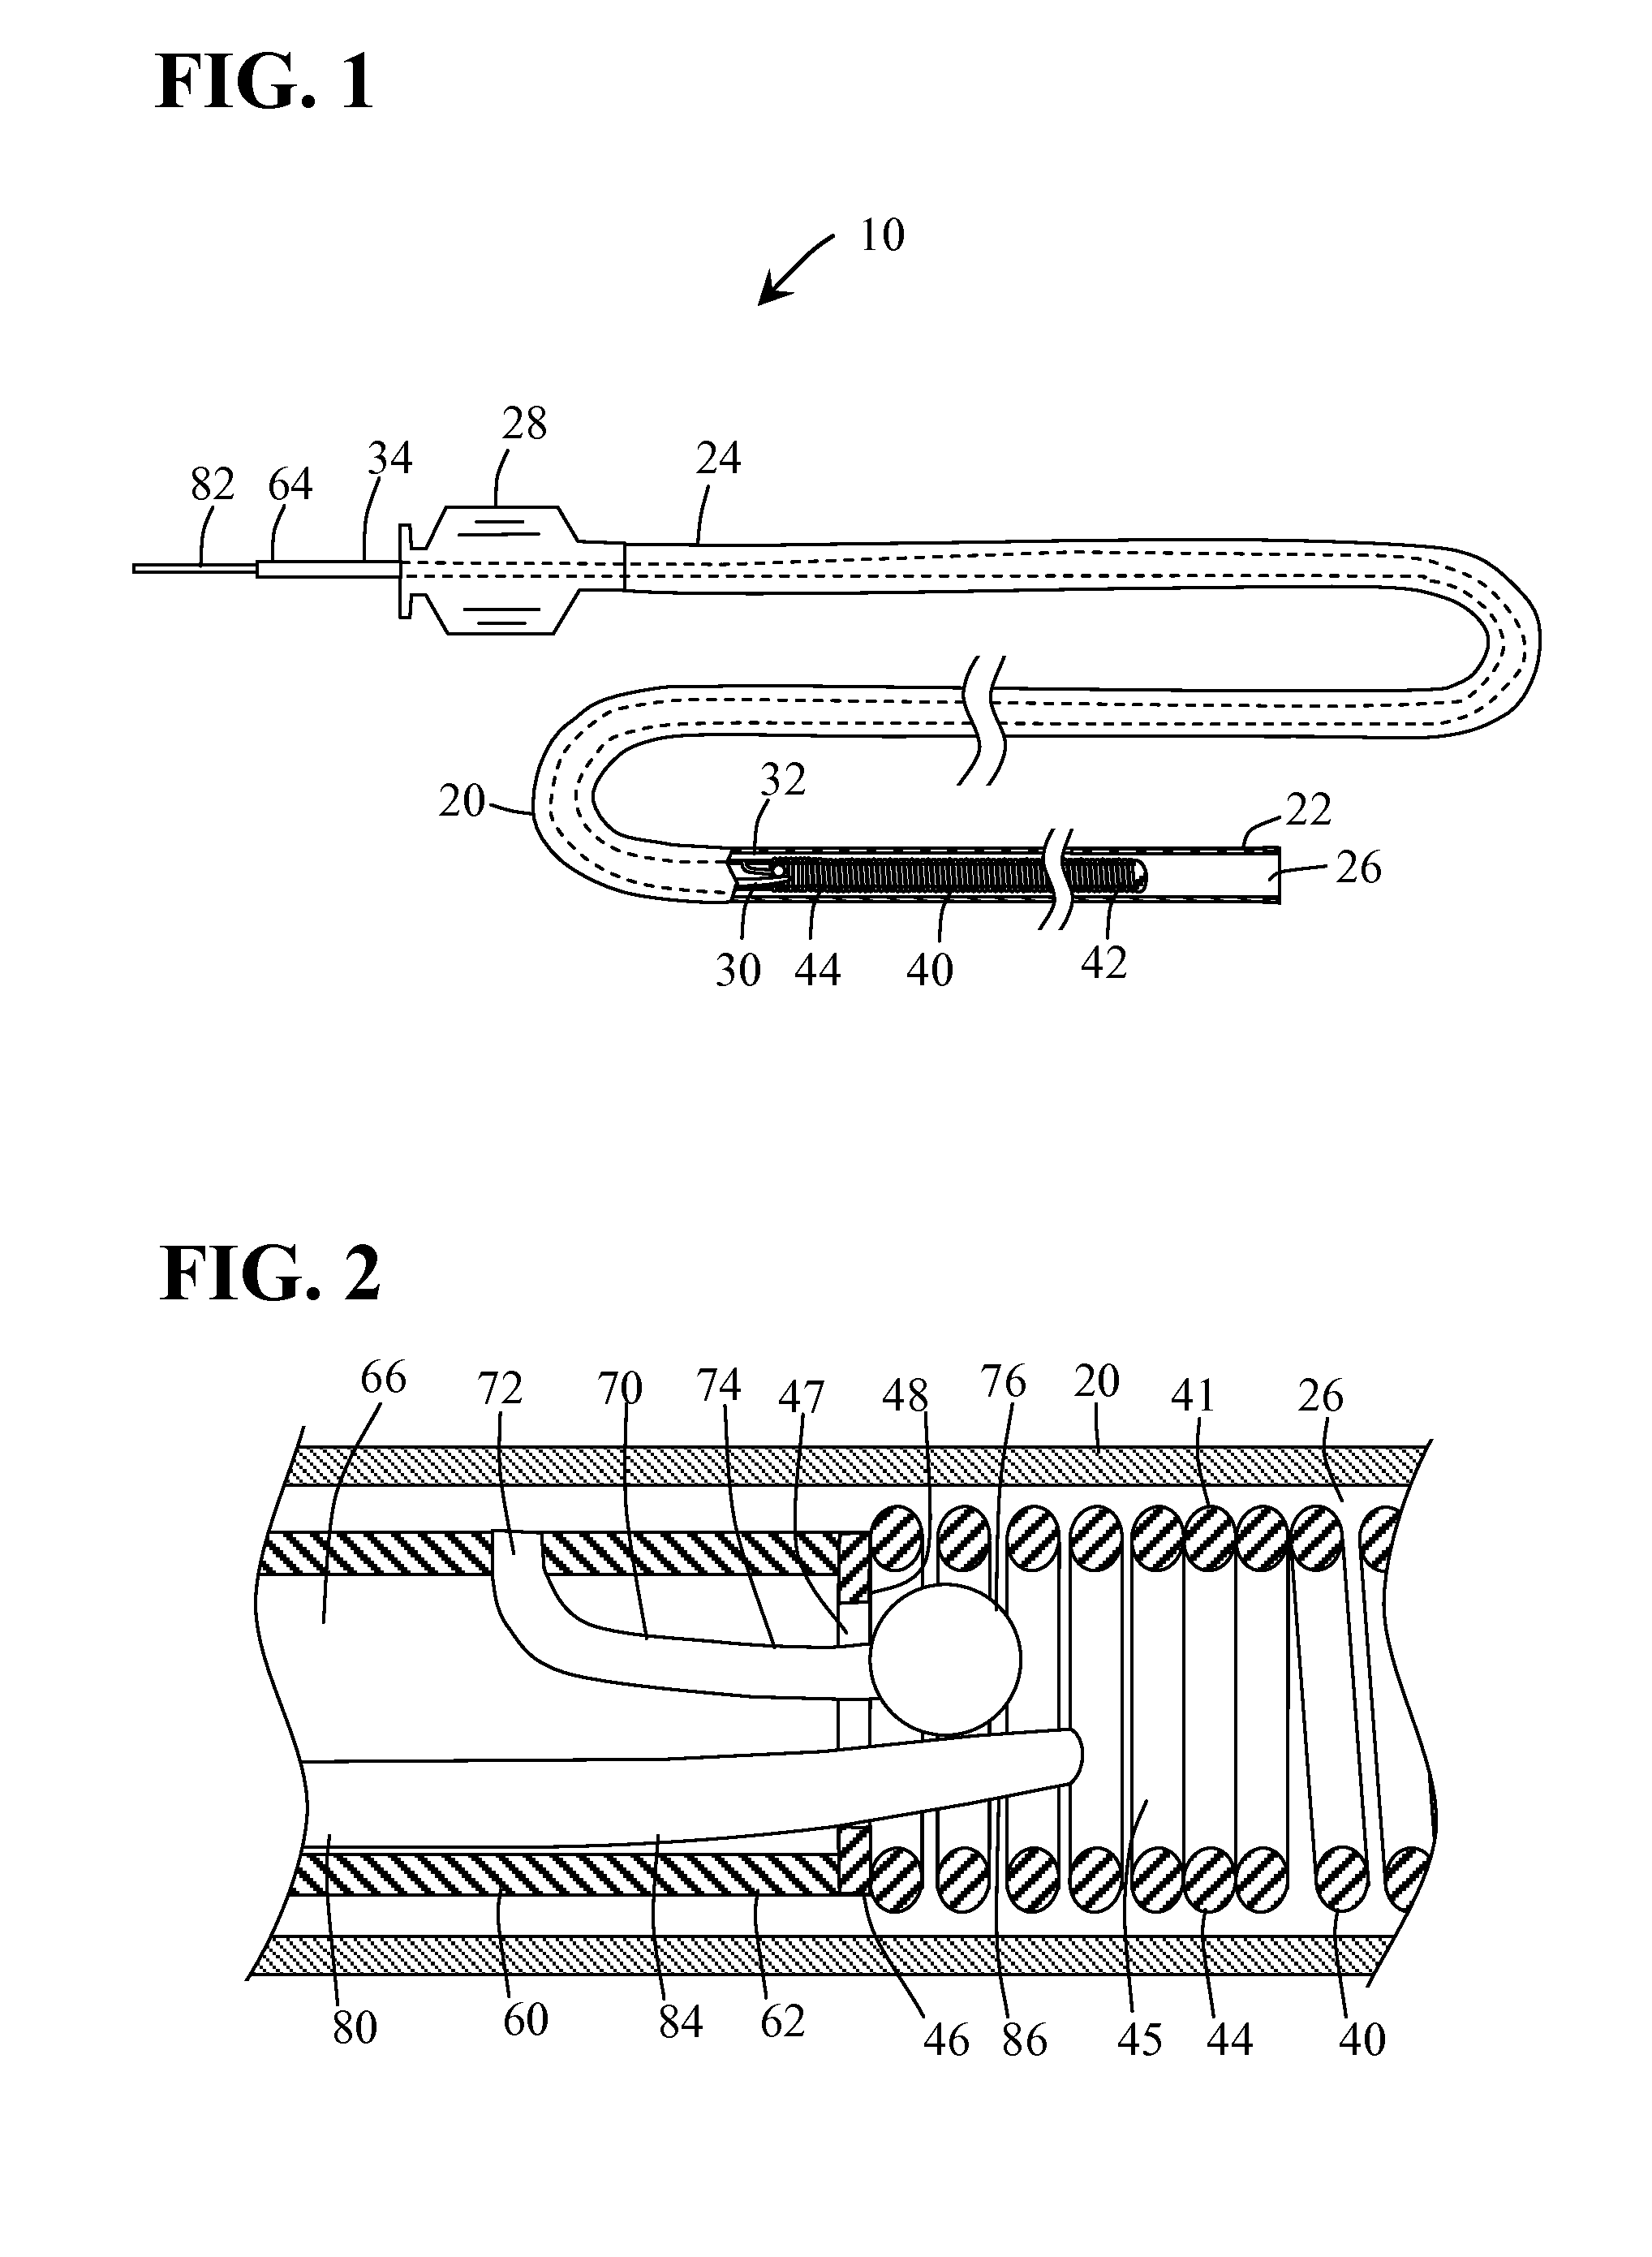 Detachable Coil Release System and Handle System